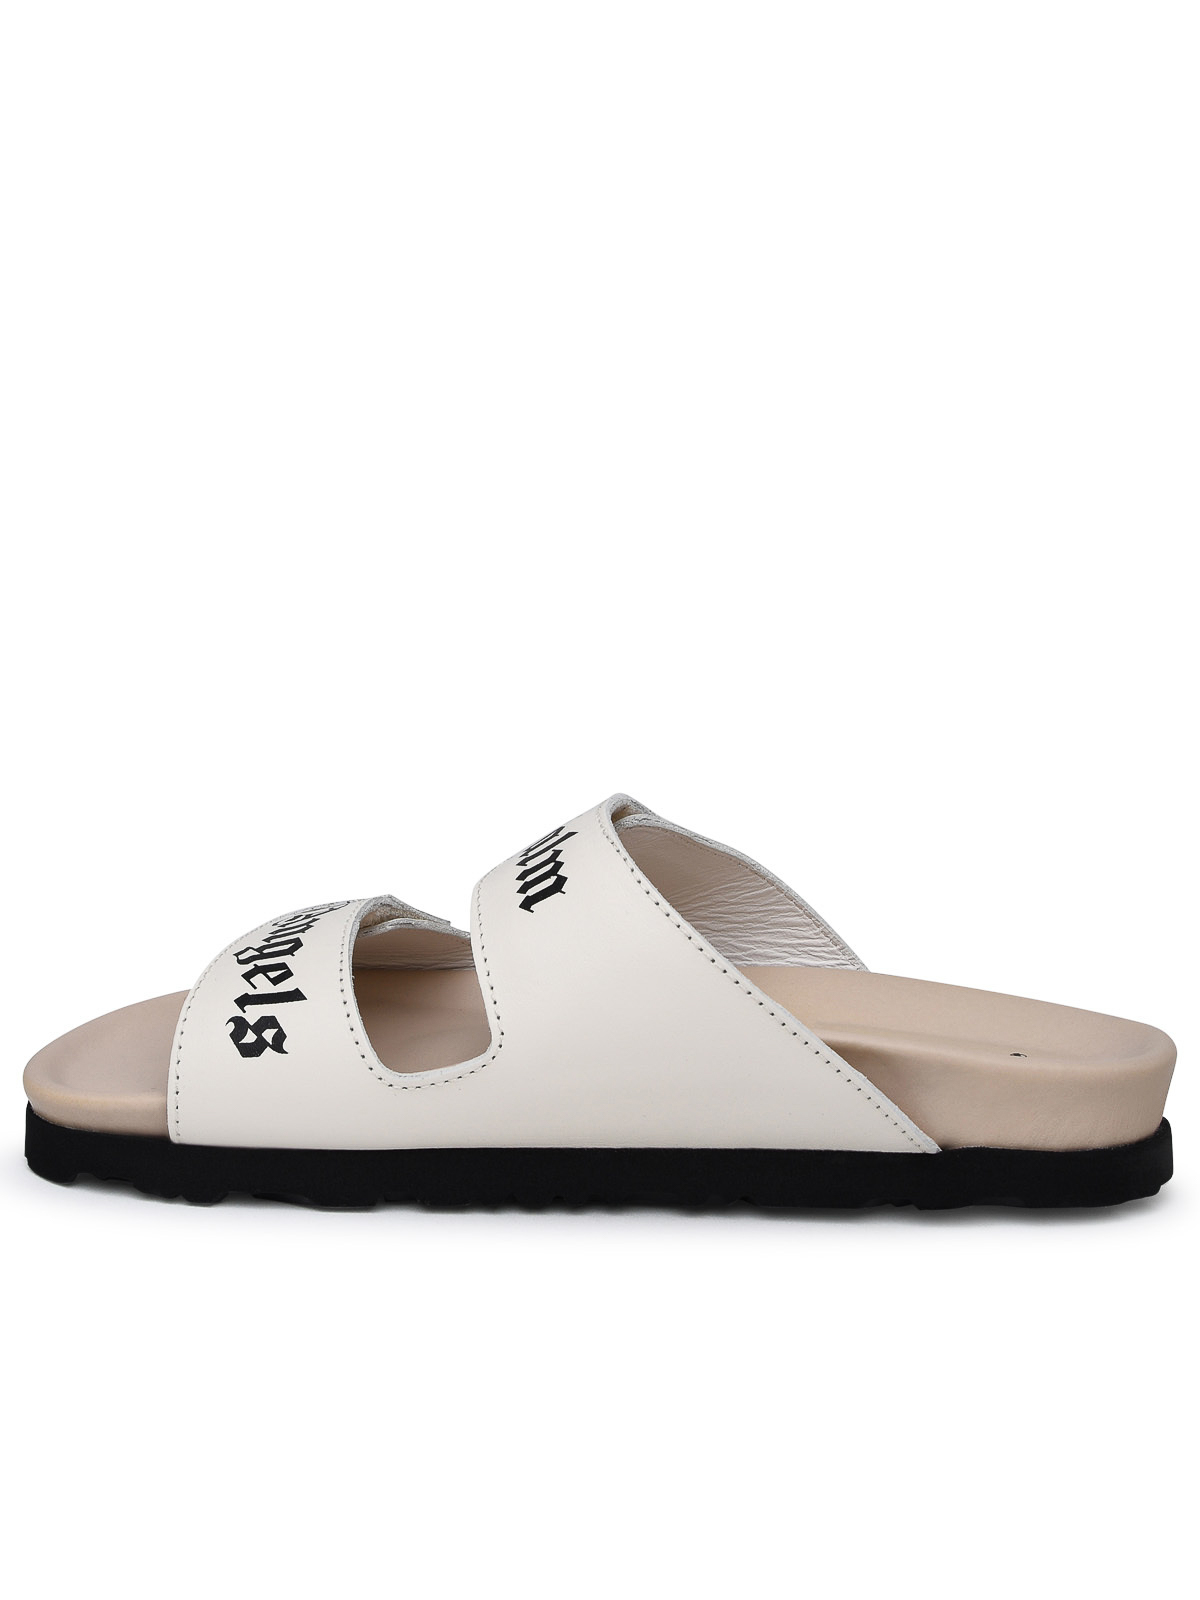 Shop Palm Angels White Leather Slipper